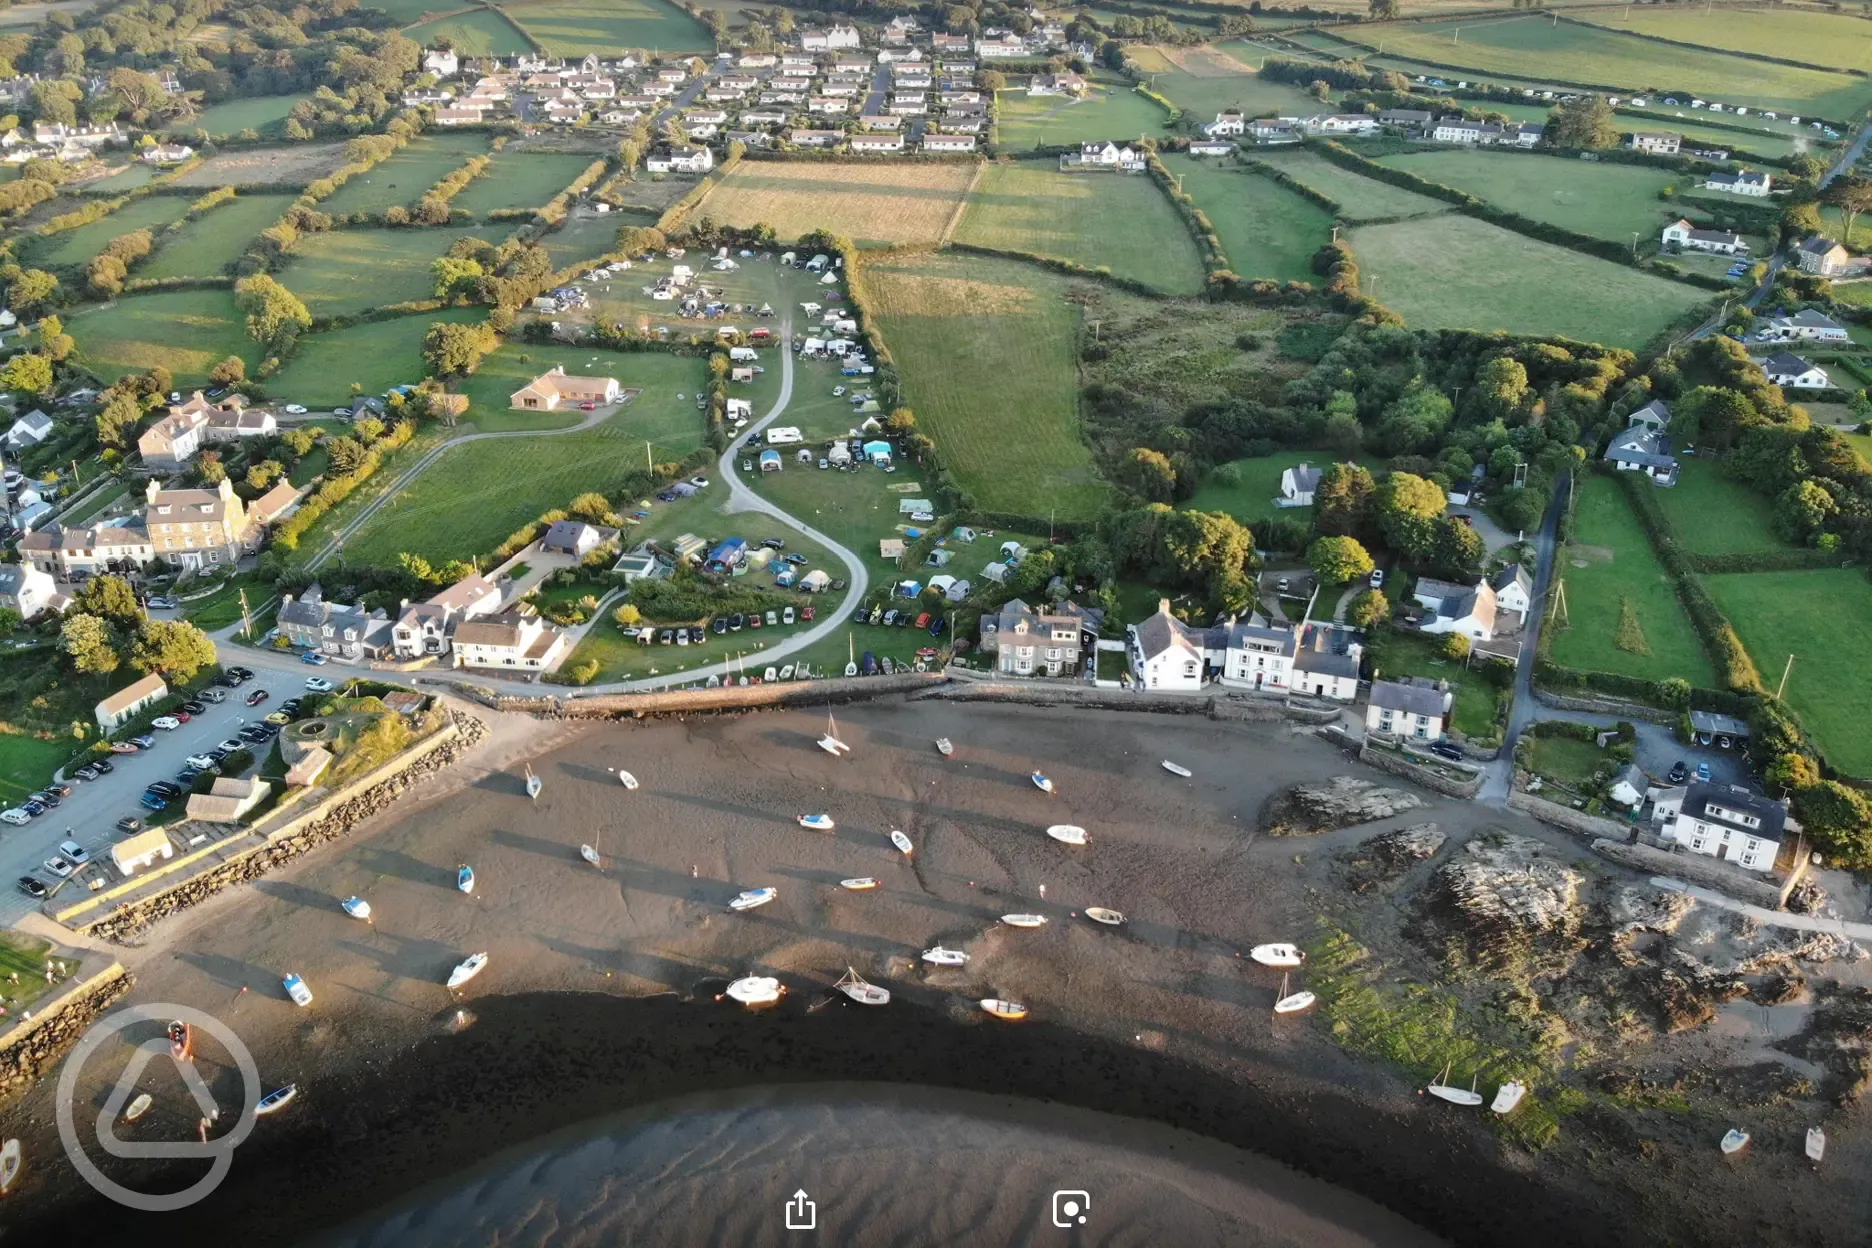 Morawelon Camping and Caravanning aerial view August 2018